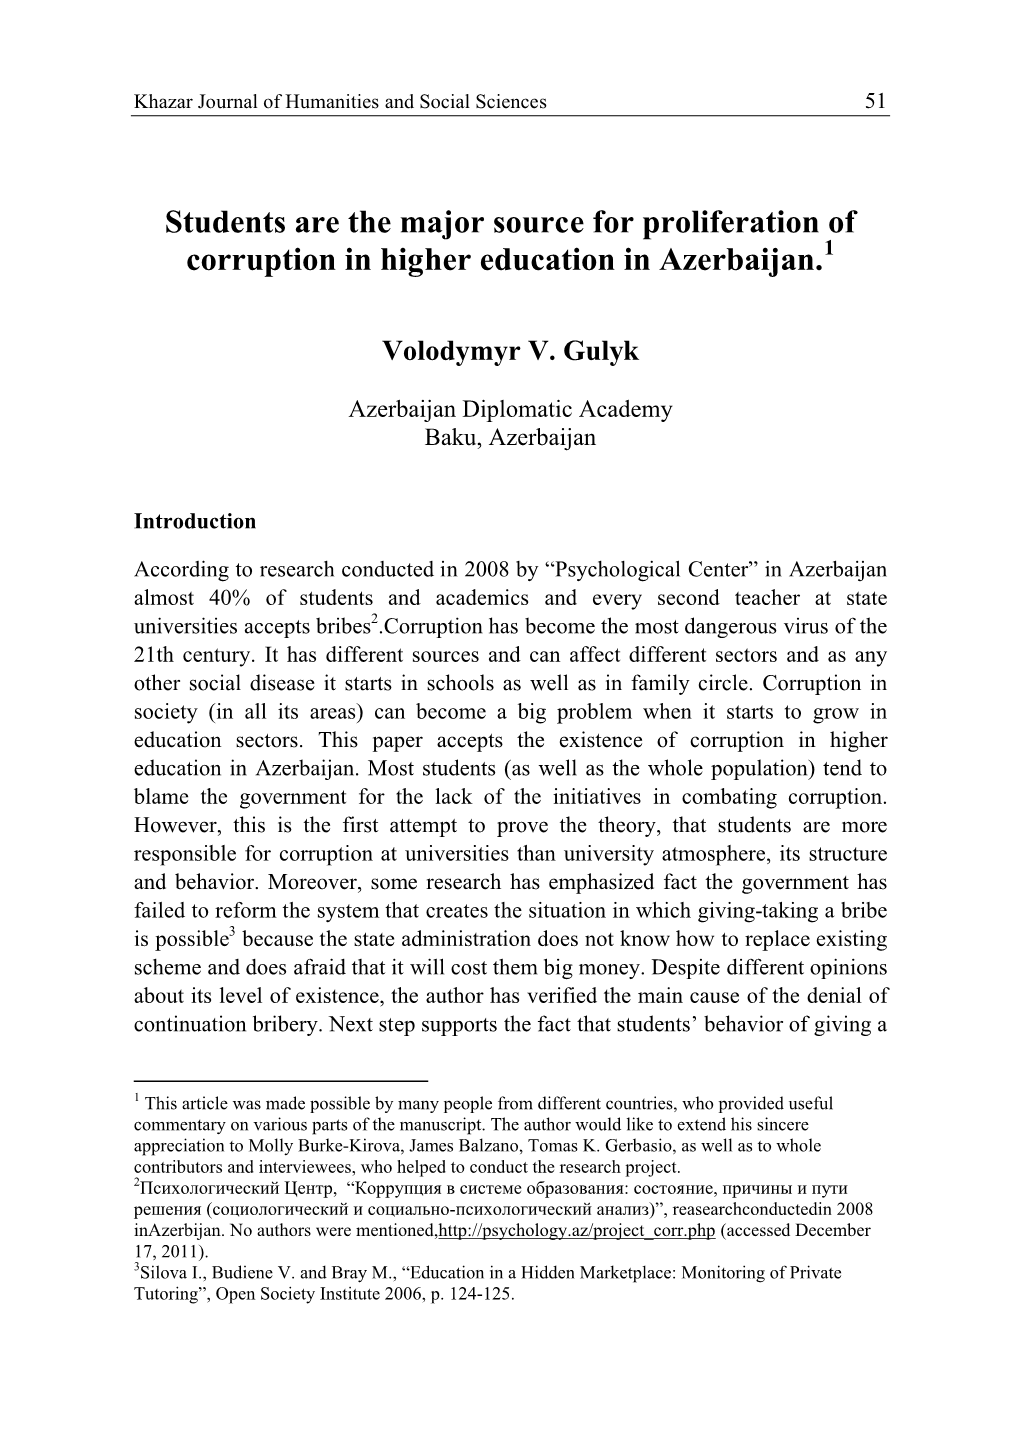 Students Are the Major Source for Proliferation of Corruption in Higher Education in Azerbaijan.1